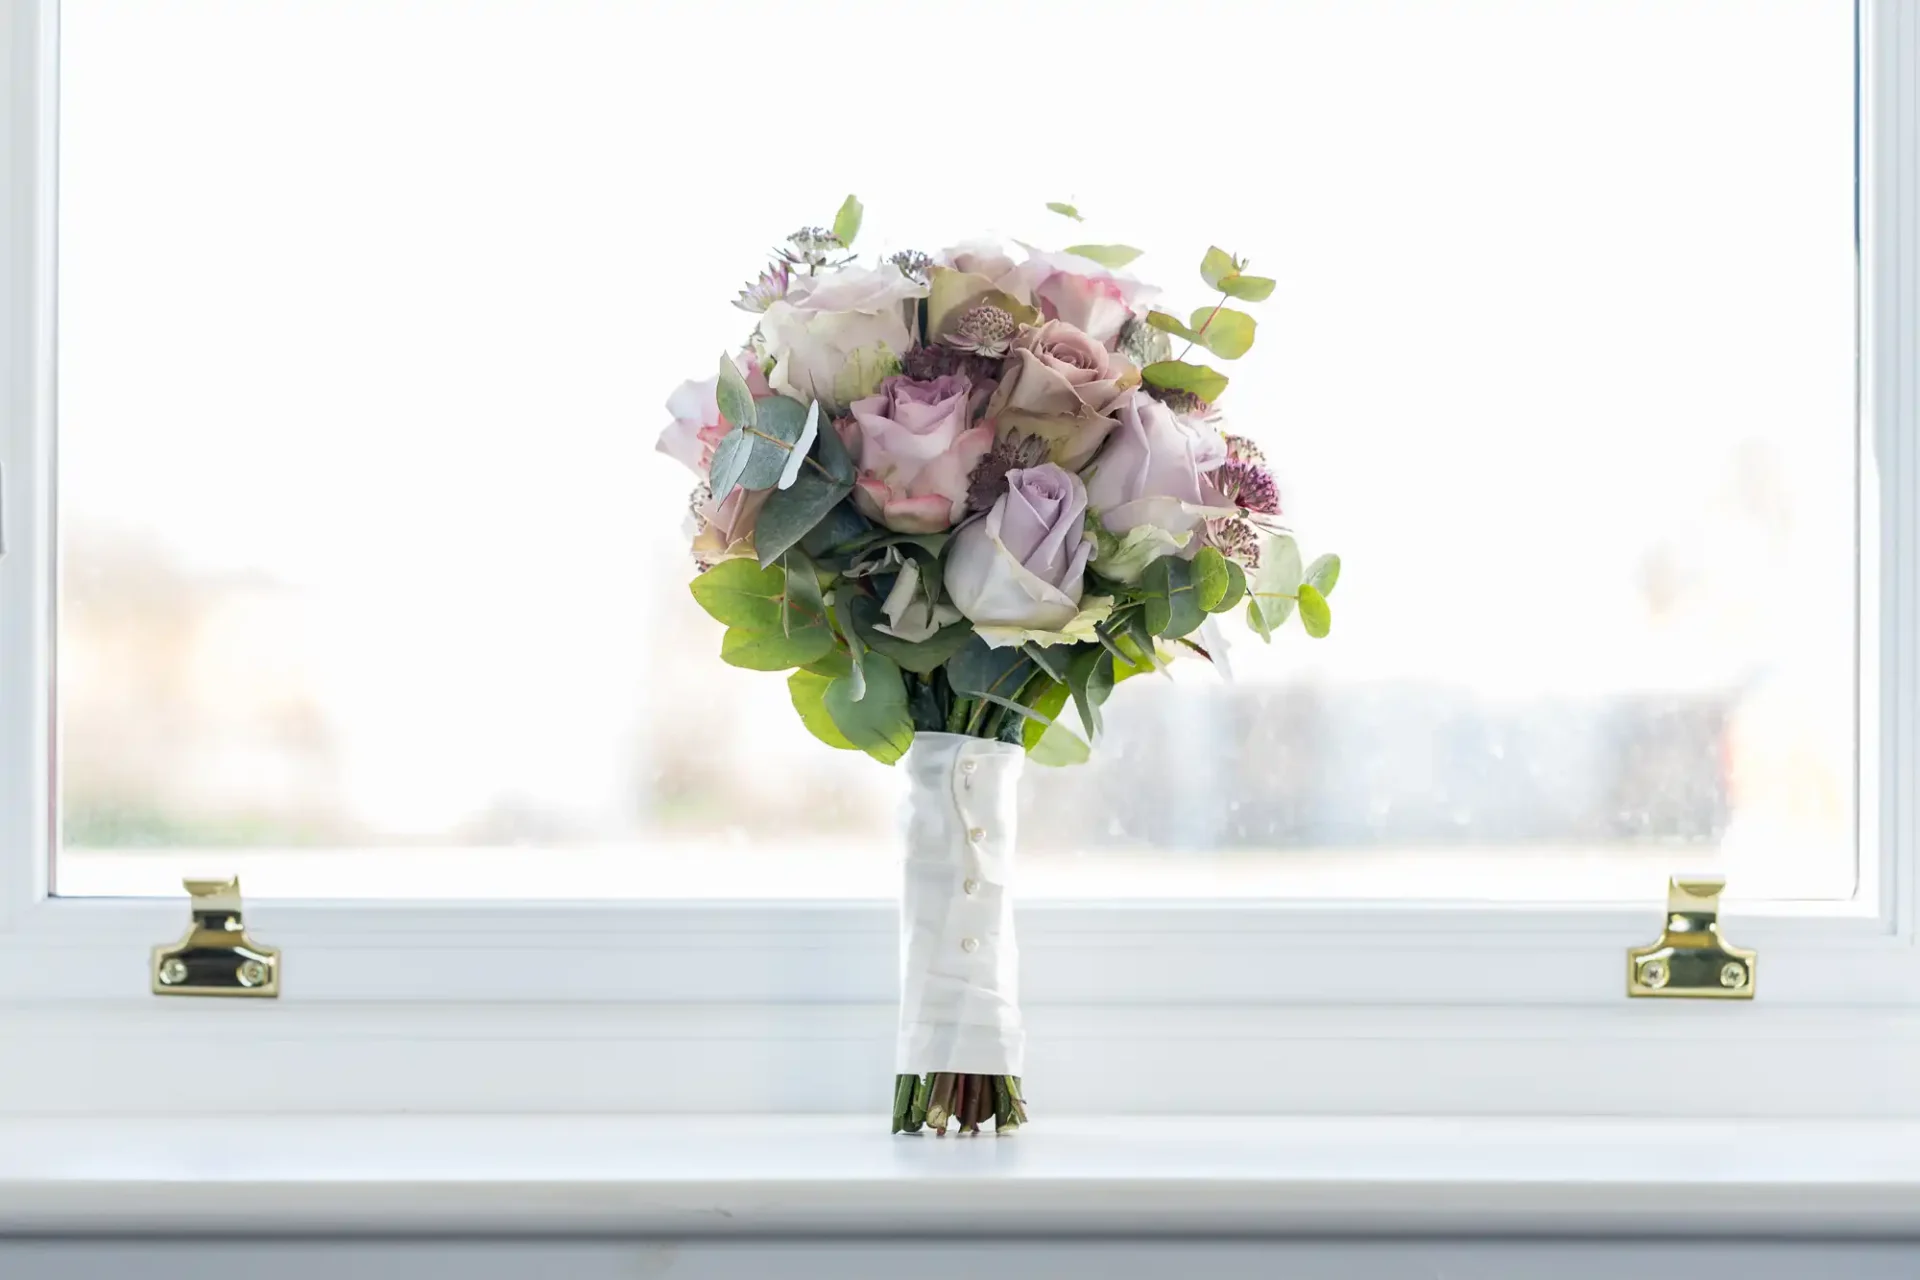 A bridal bouquet with pale pink roses and white flowers wrapped in a ribbon, set against a bright window.